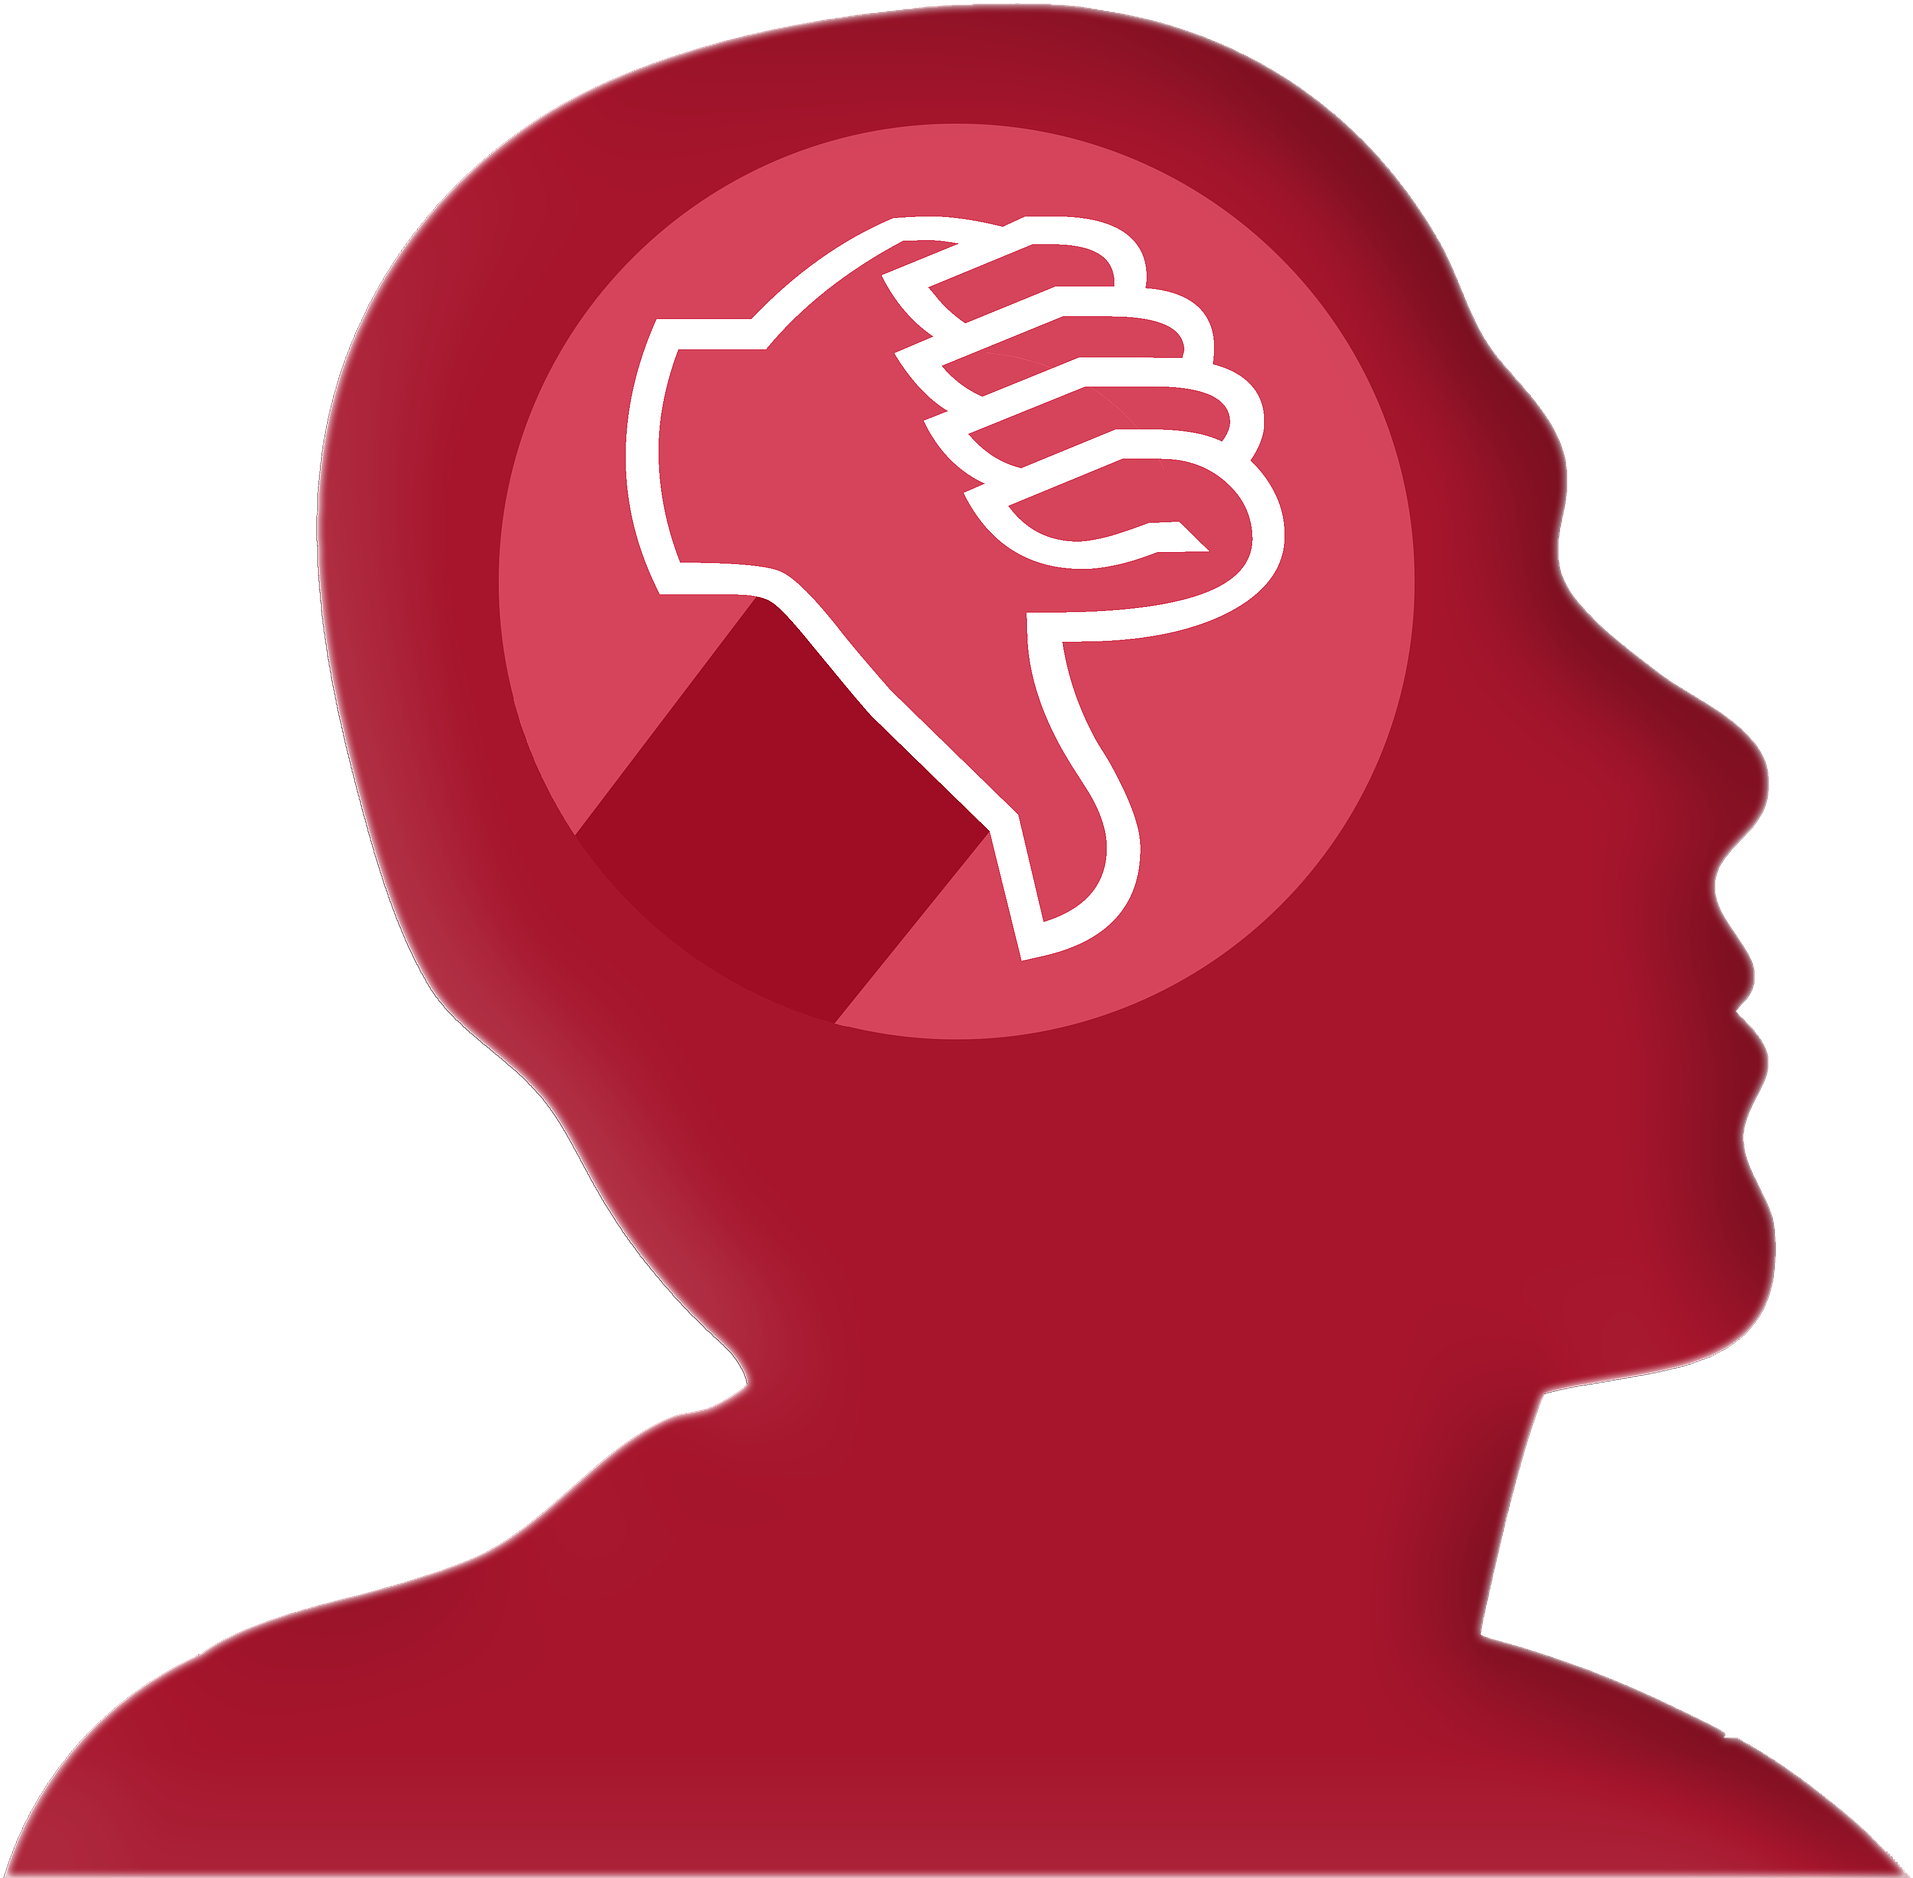 Negative Thoughts Concept PNG image